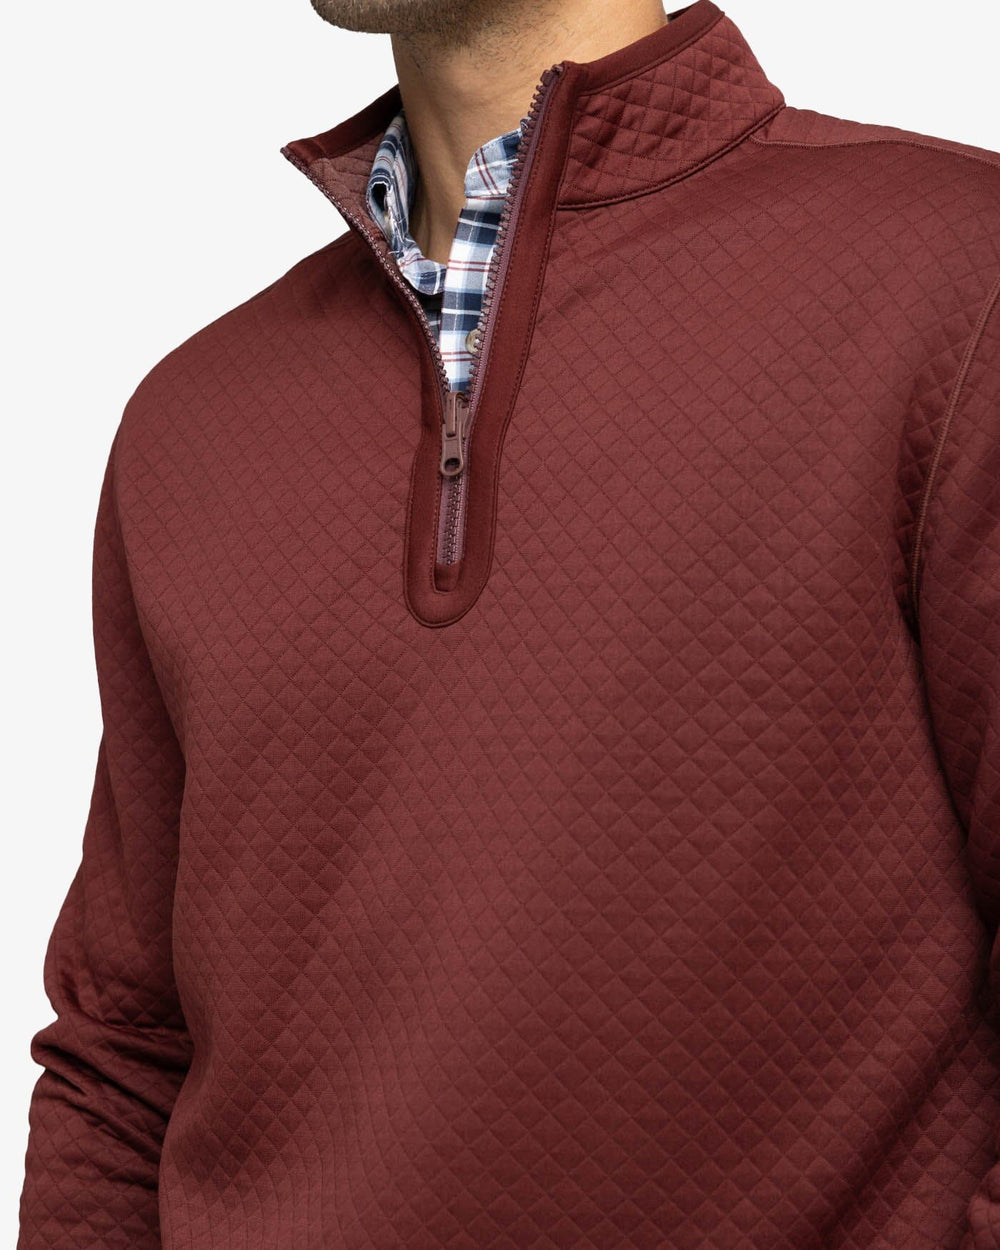 The detail view of the Southern Tide Arden Reversible Quarter Zip by Southern Tide - Bordeaux Red